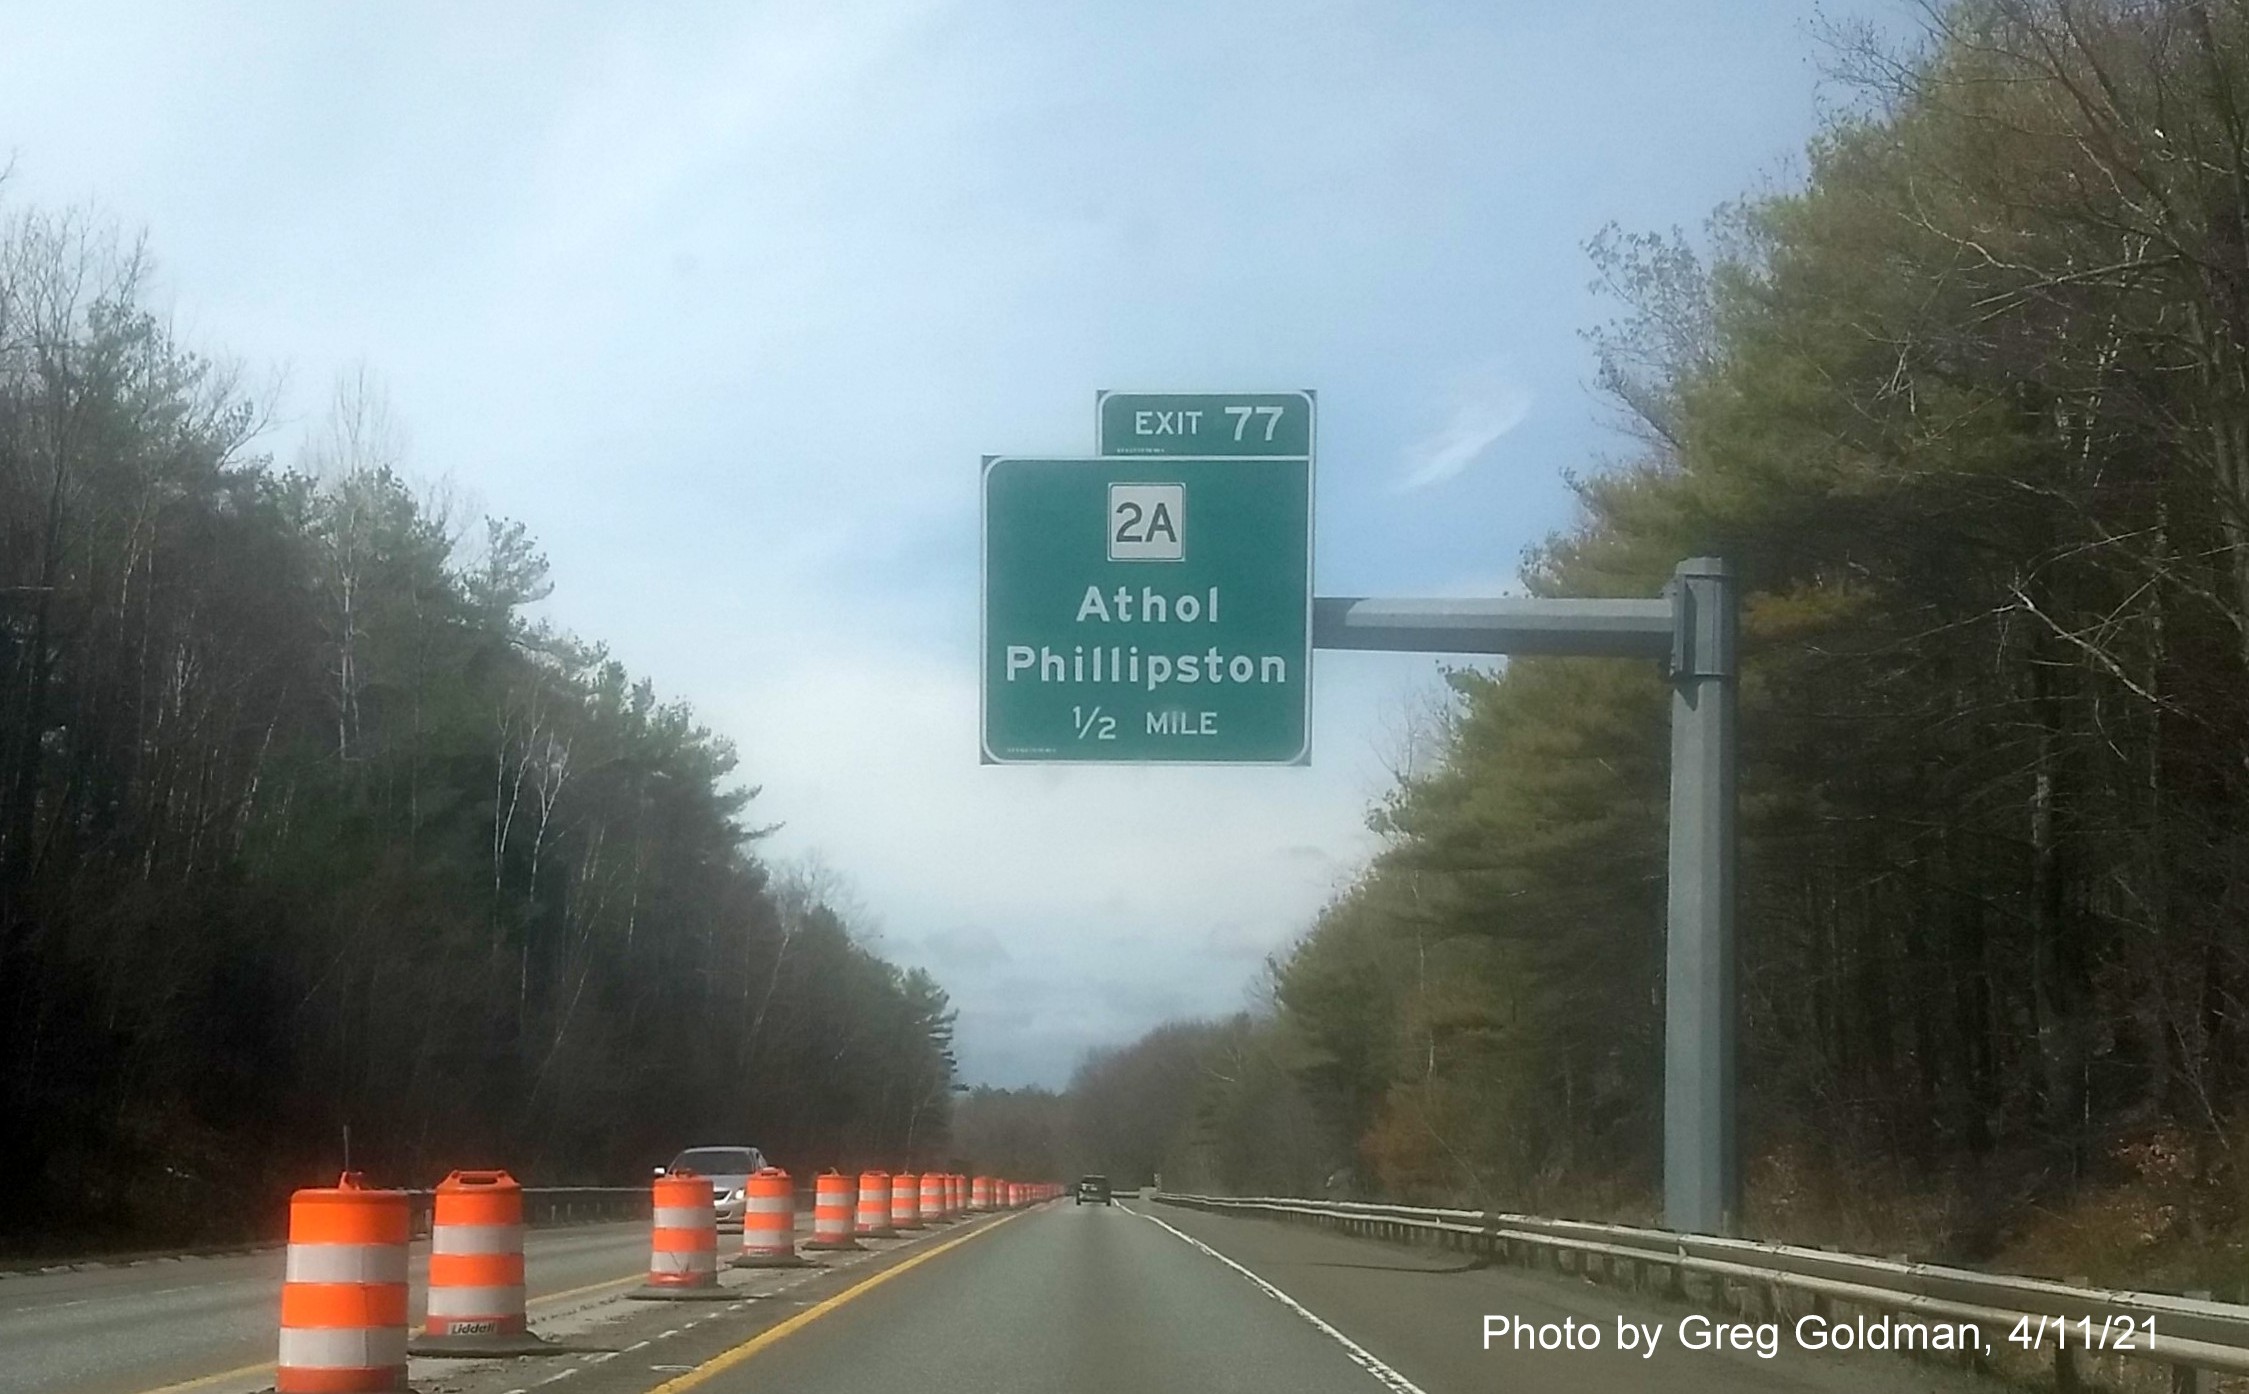 Image of 1/2 Mile advance sign for MA 2A exit with new milepost based exit number on MA 2 West in Athol, by Greg Goldman, April 2021